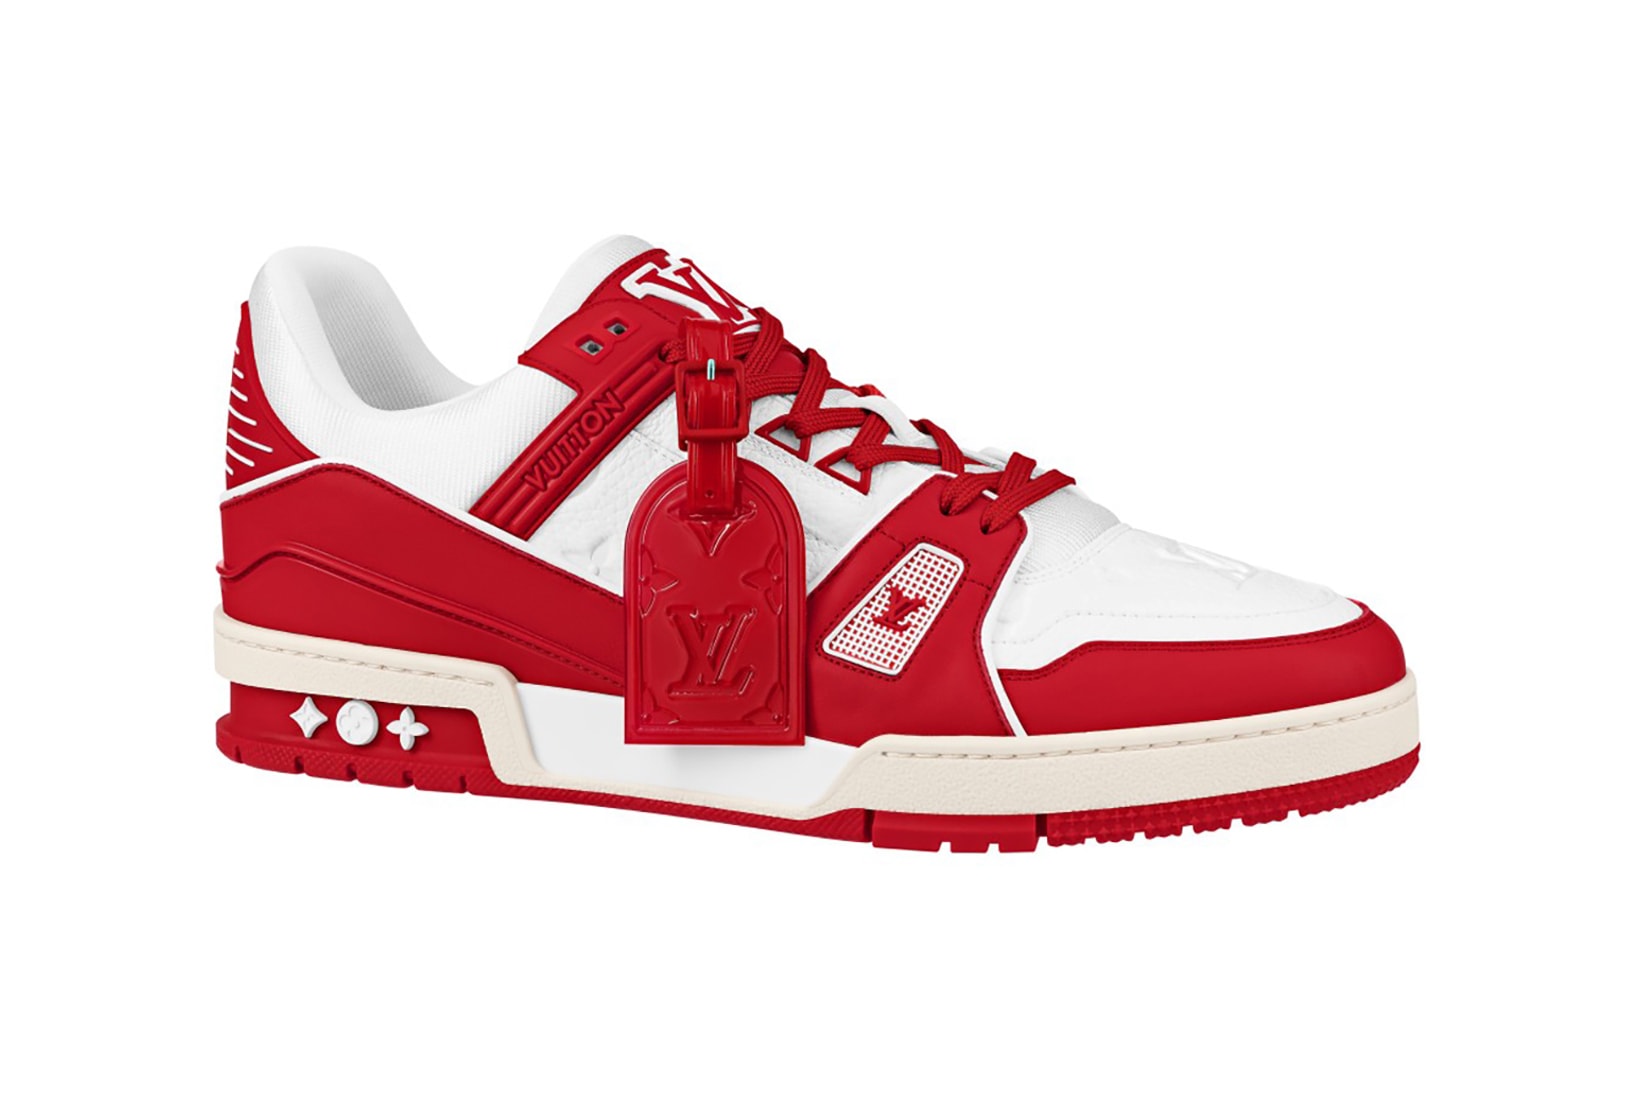 RED) x Louis Vuitton World AIDS Day Sneakers